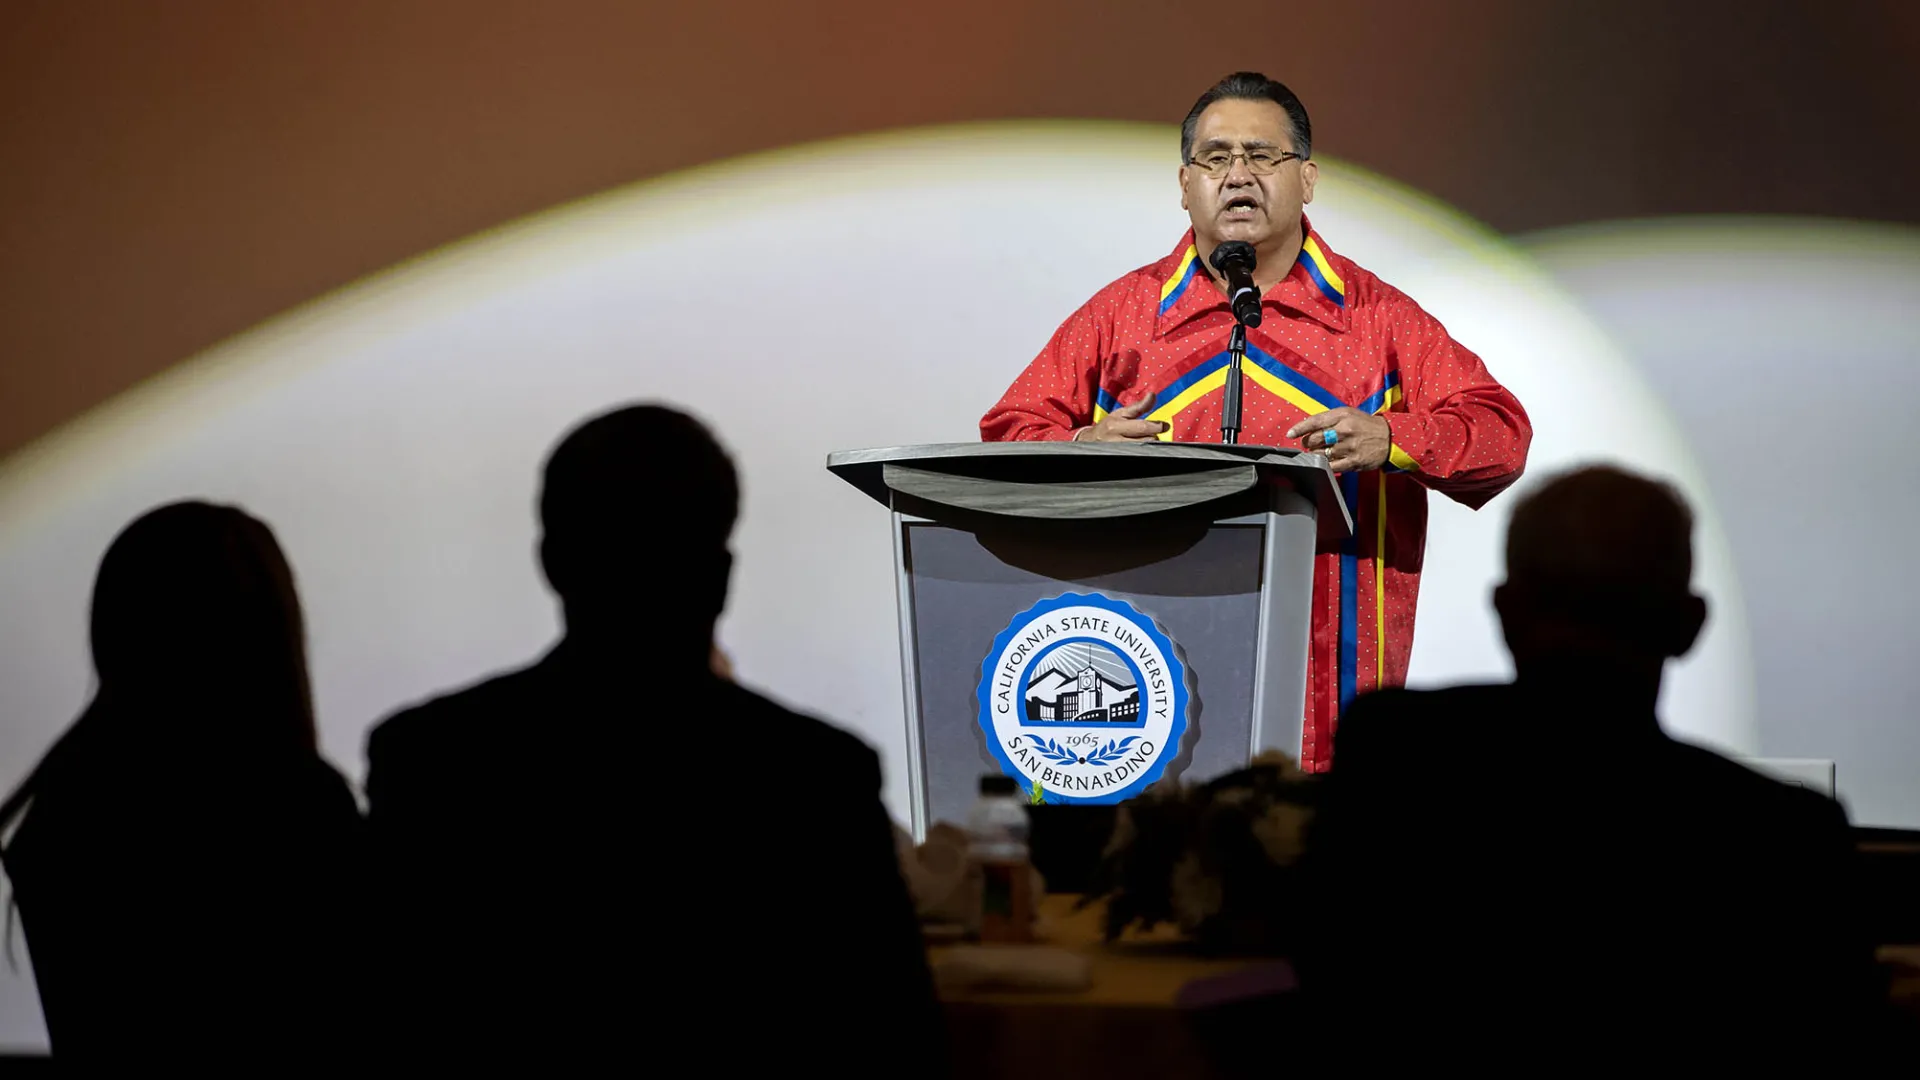 James Ramos (Serrano/Cahuilla), the state Assembly member representing San Bernardino and a CSUSB alumnus, will be one of the speakers at the Native American/Indigenous Education Summit.